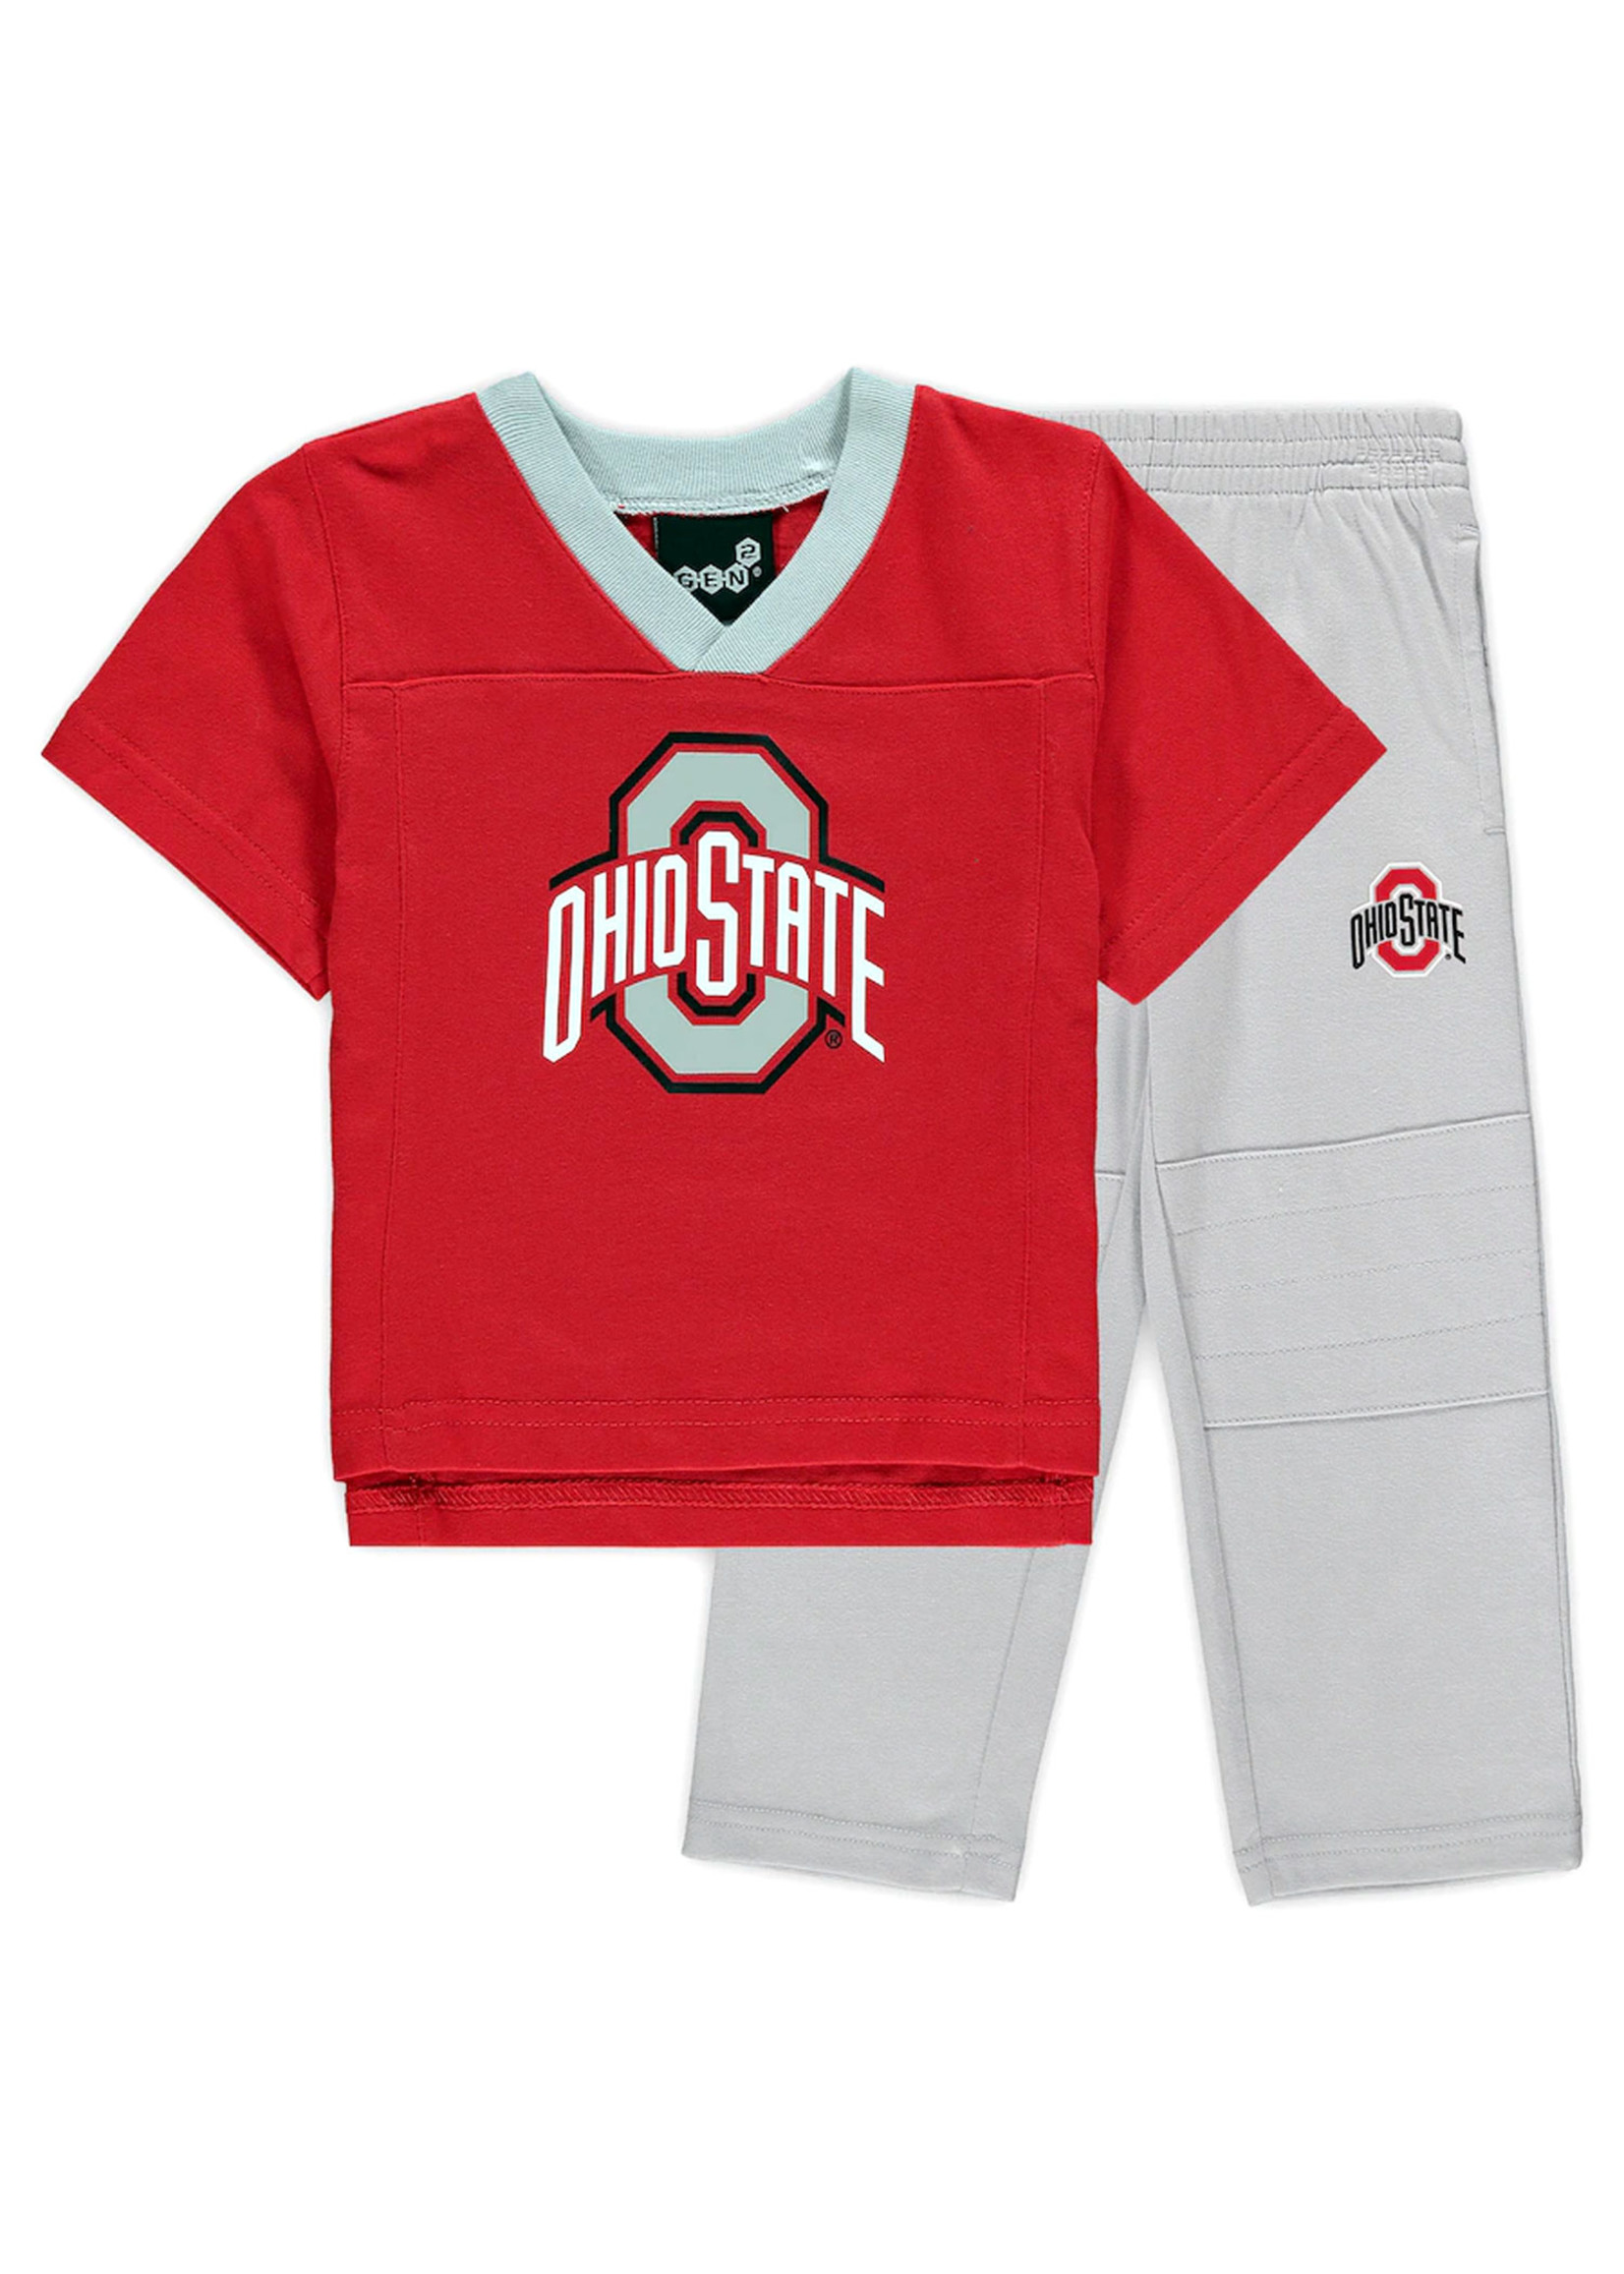 Ohio State Buckeyes Toddler Training Camp Jersey T-Shirt and Pants Set